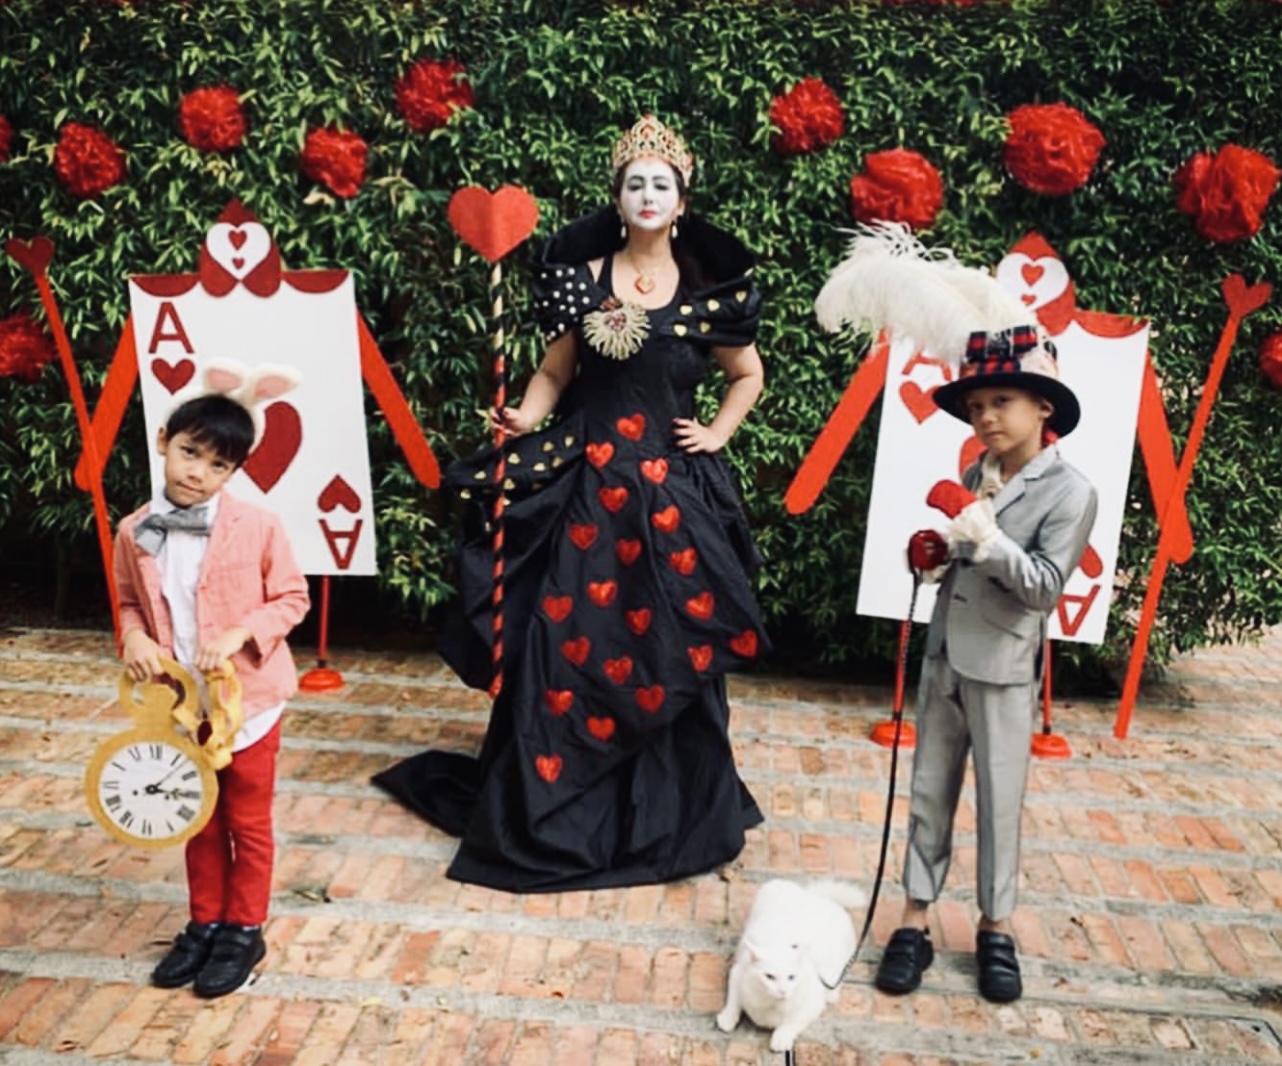 From The Mask To Red Riding Hood: This M'sian Creates Epic Halloween ...